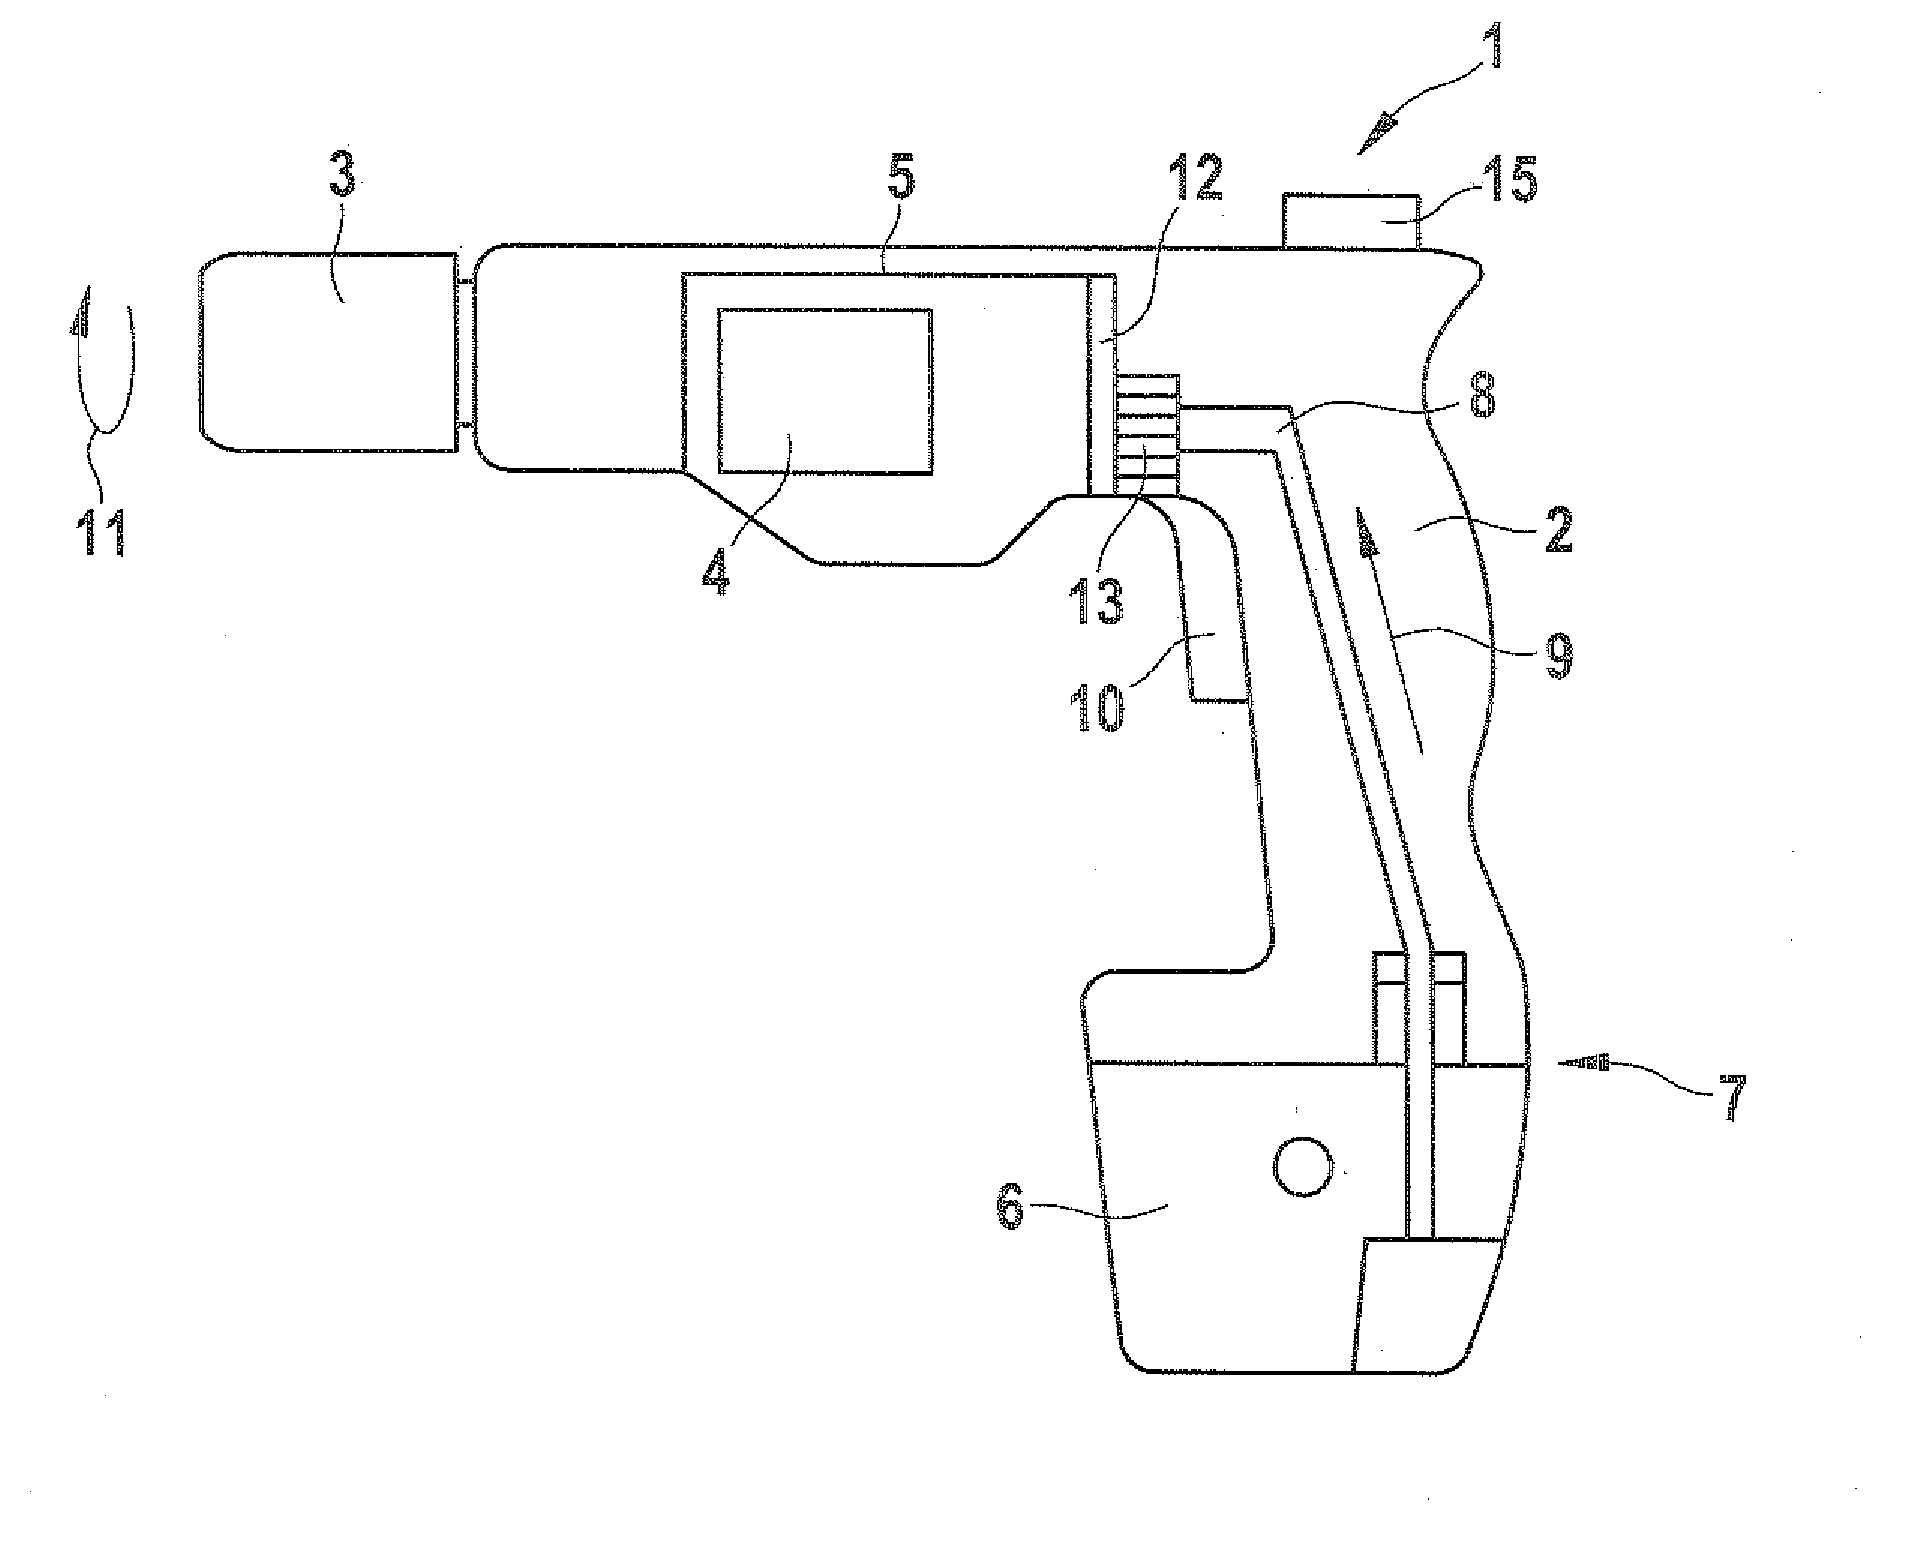 Method for operating an electrical power tool, and a drive unit for an electric power tool